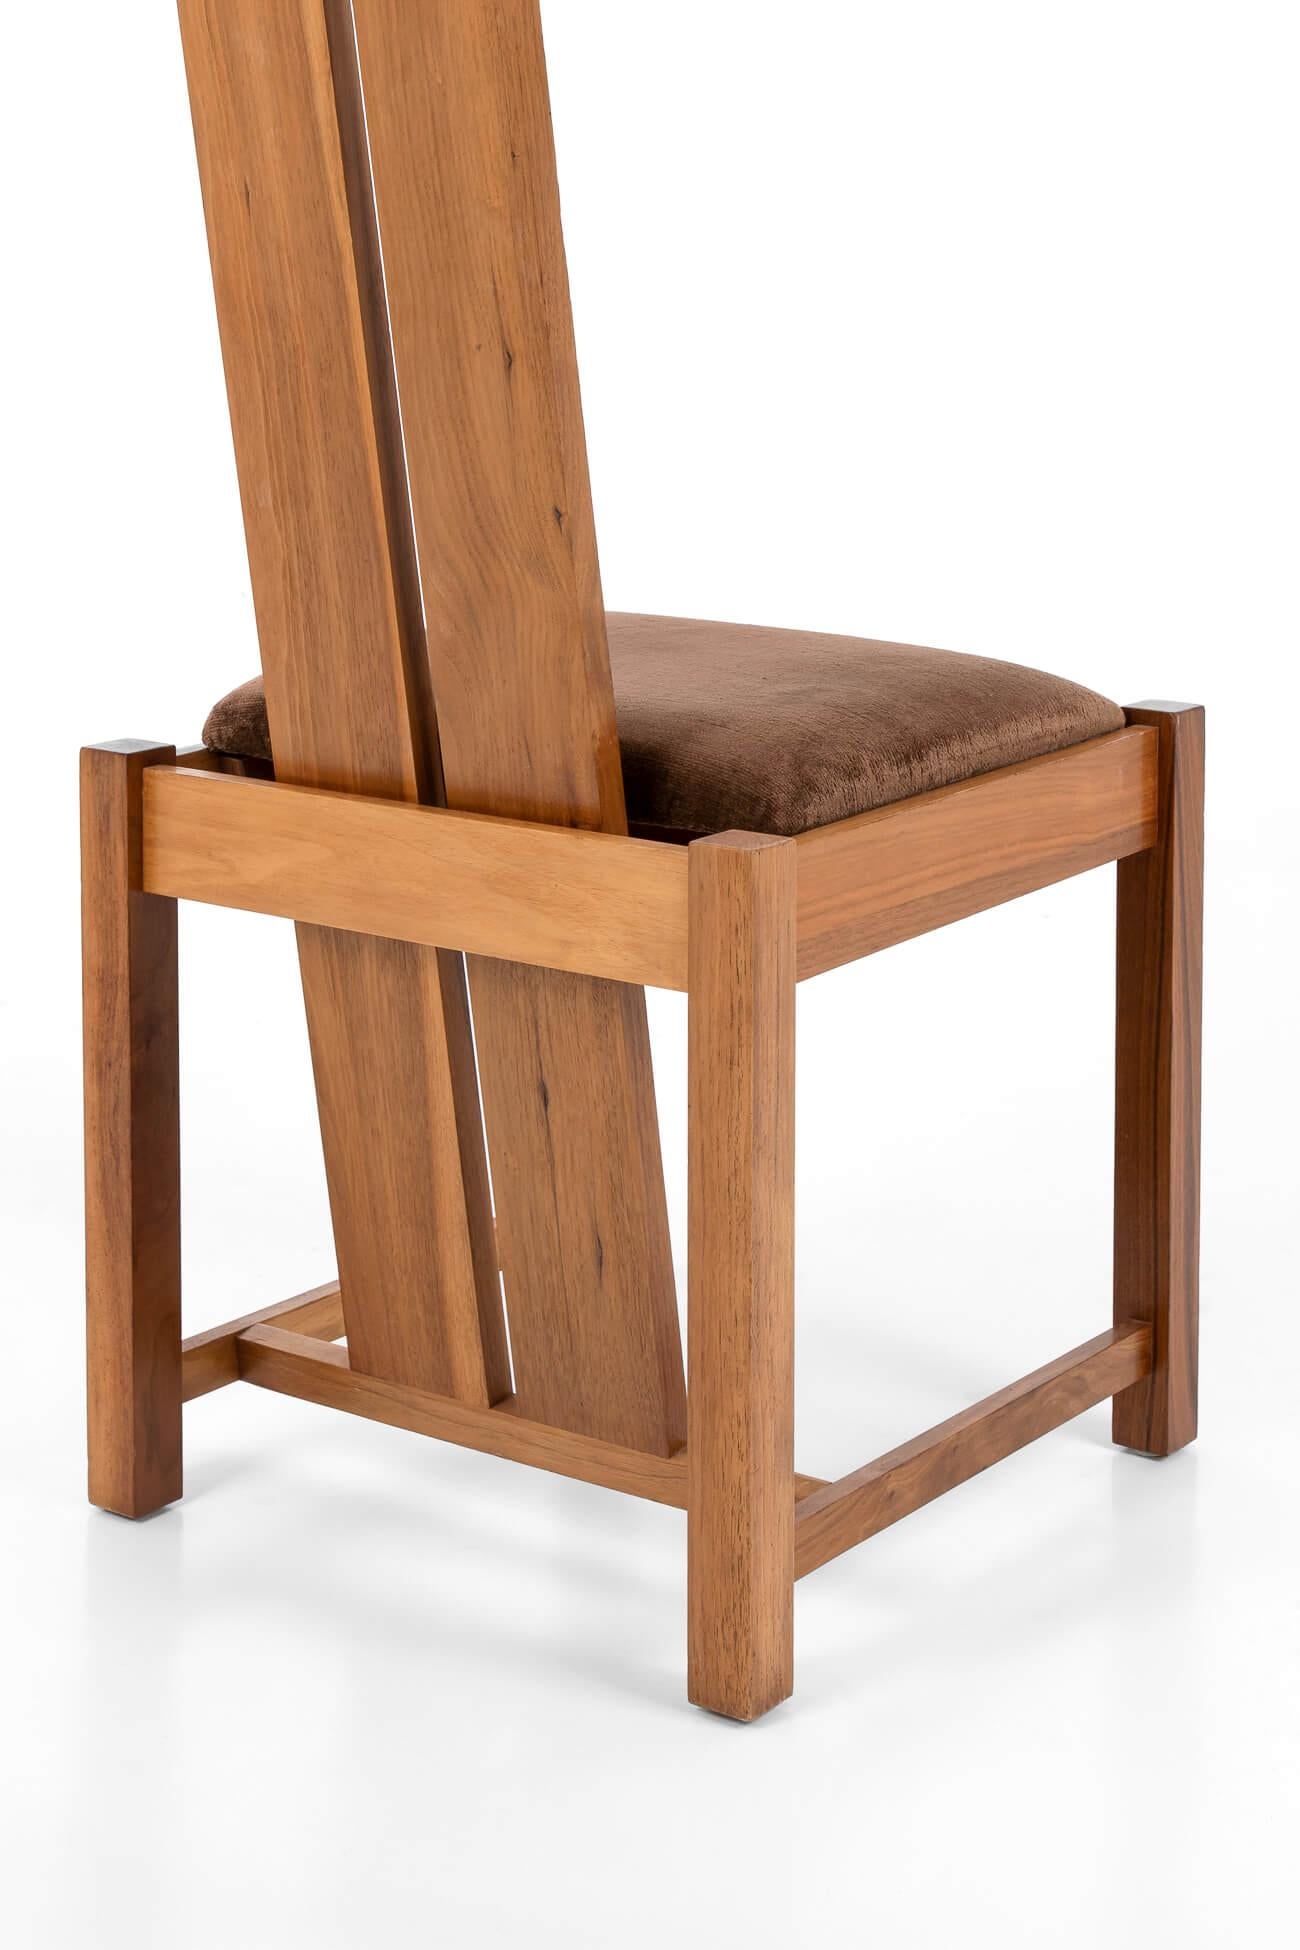 Set of Four Samuel Chan Alba Dining Chairs in Solid Walnut, Early 20th Century For Sale 1